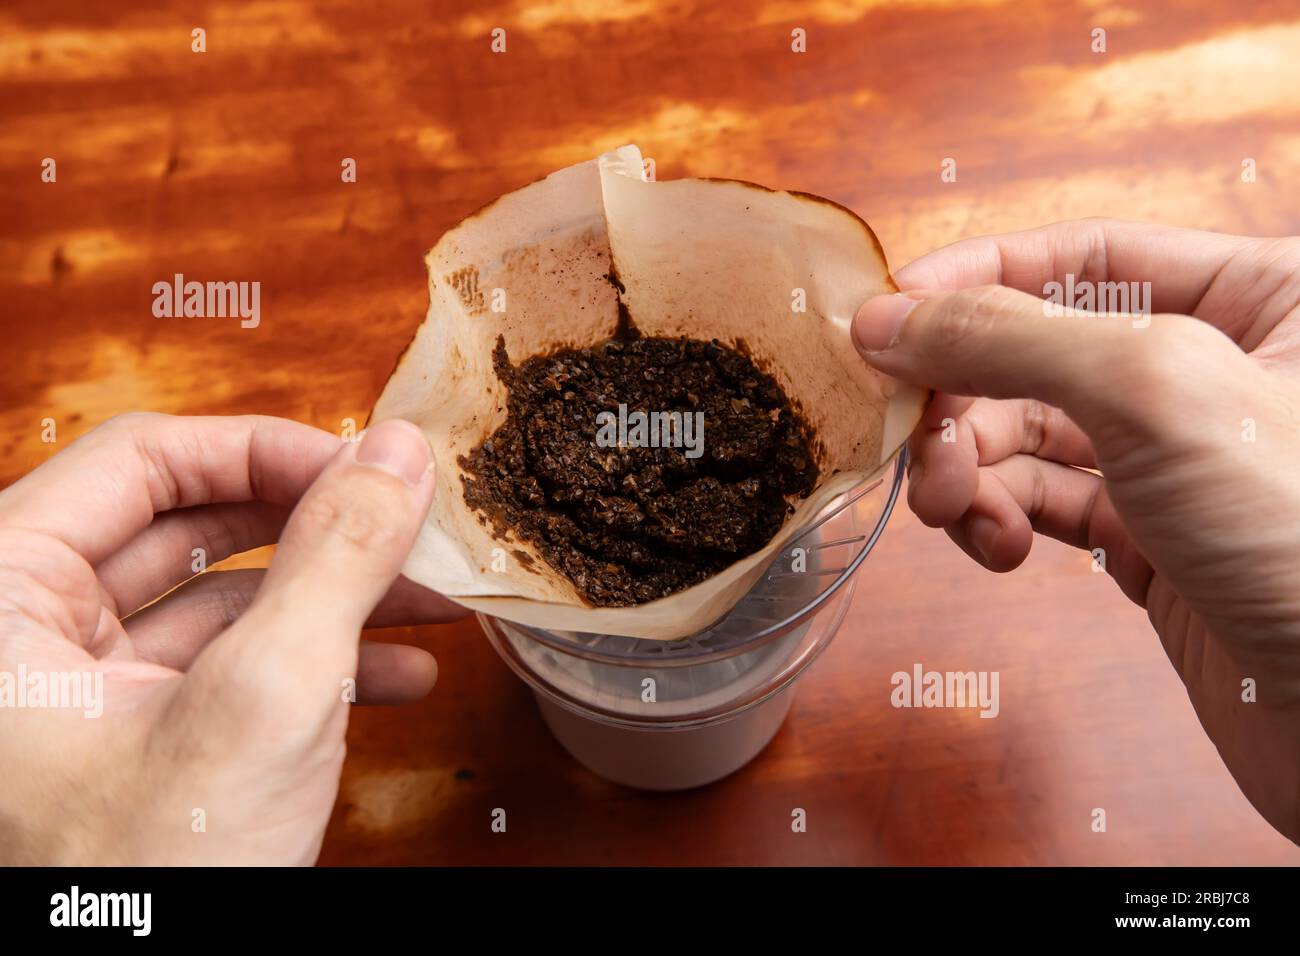 Used coffee ground left in a coffee dripper. Coffee grounds can be used as a fertilizer. Stock Photo